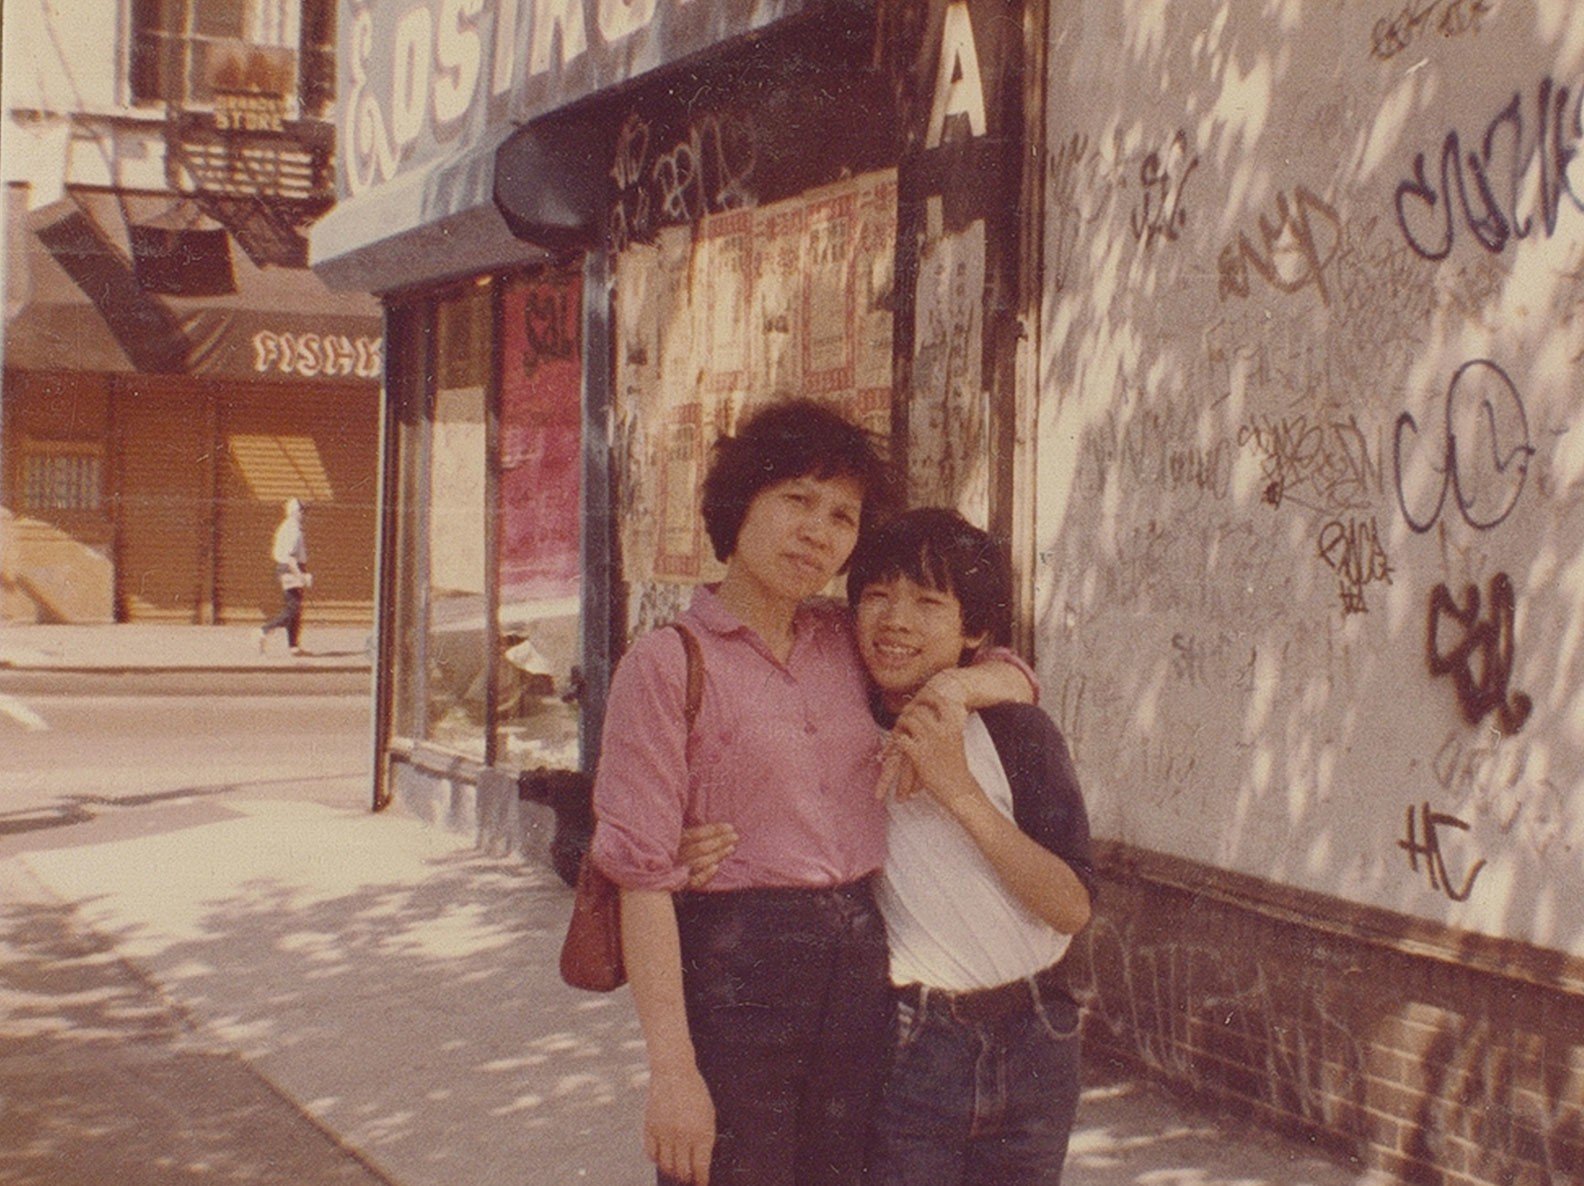 Mrs Wong and Kevin in front of their home on Delancey Street circa 1980